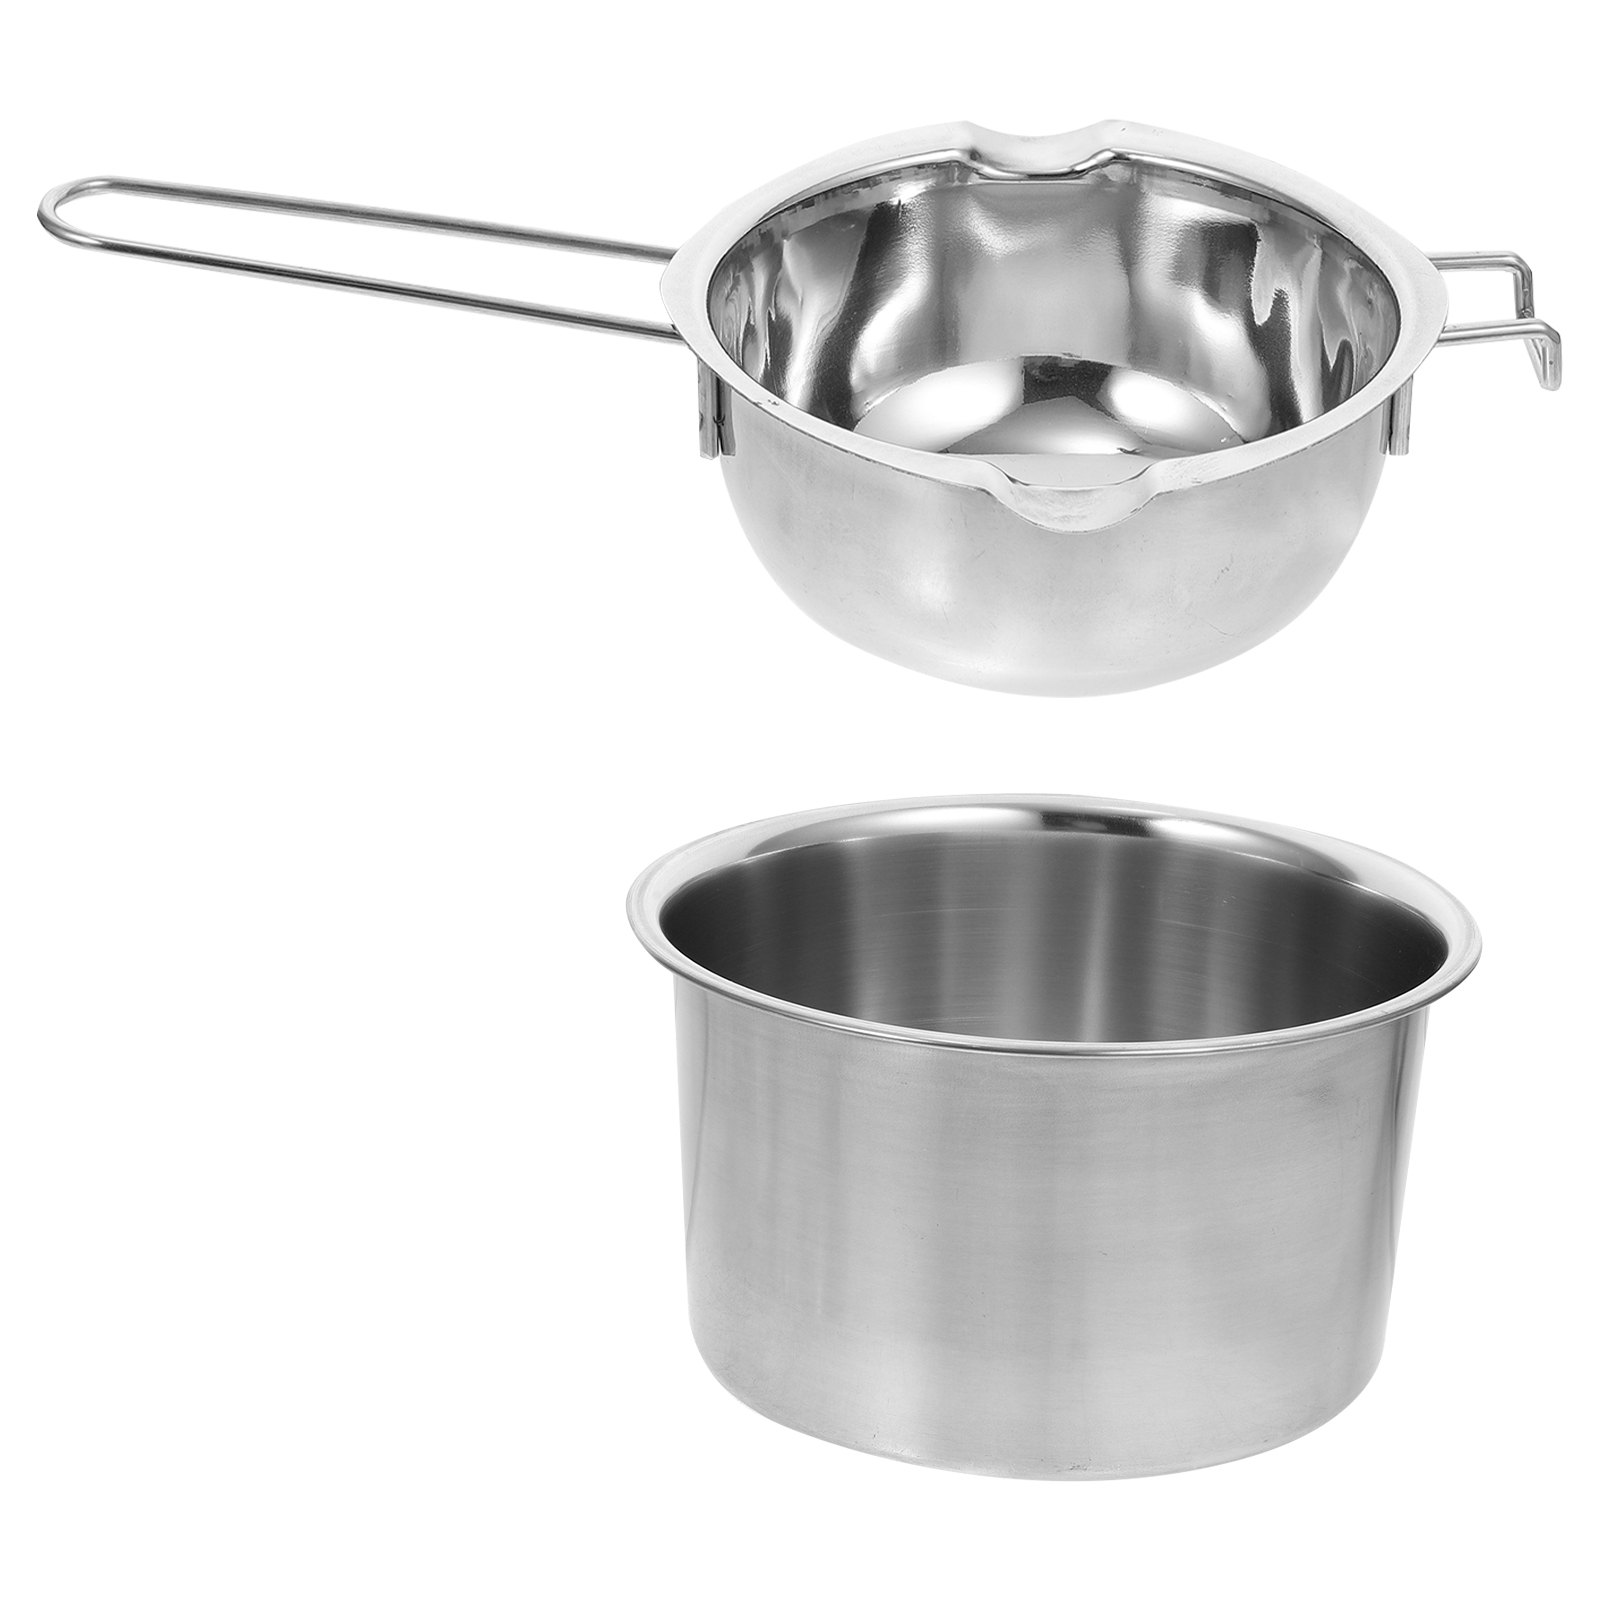 NUOLUX 1 Set Double Boiler Pot Stainless Steel Chocolate Pot Chocolate Melting Pot - image 3 of 6